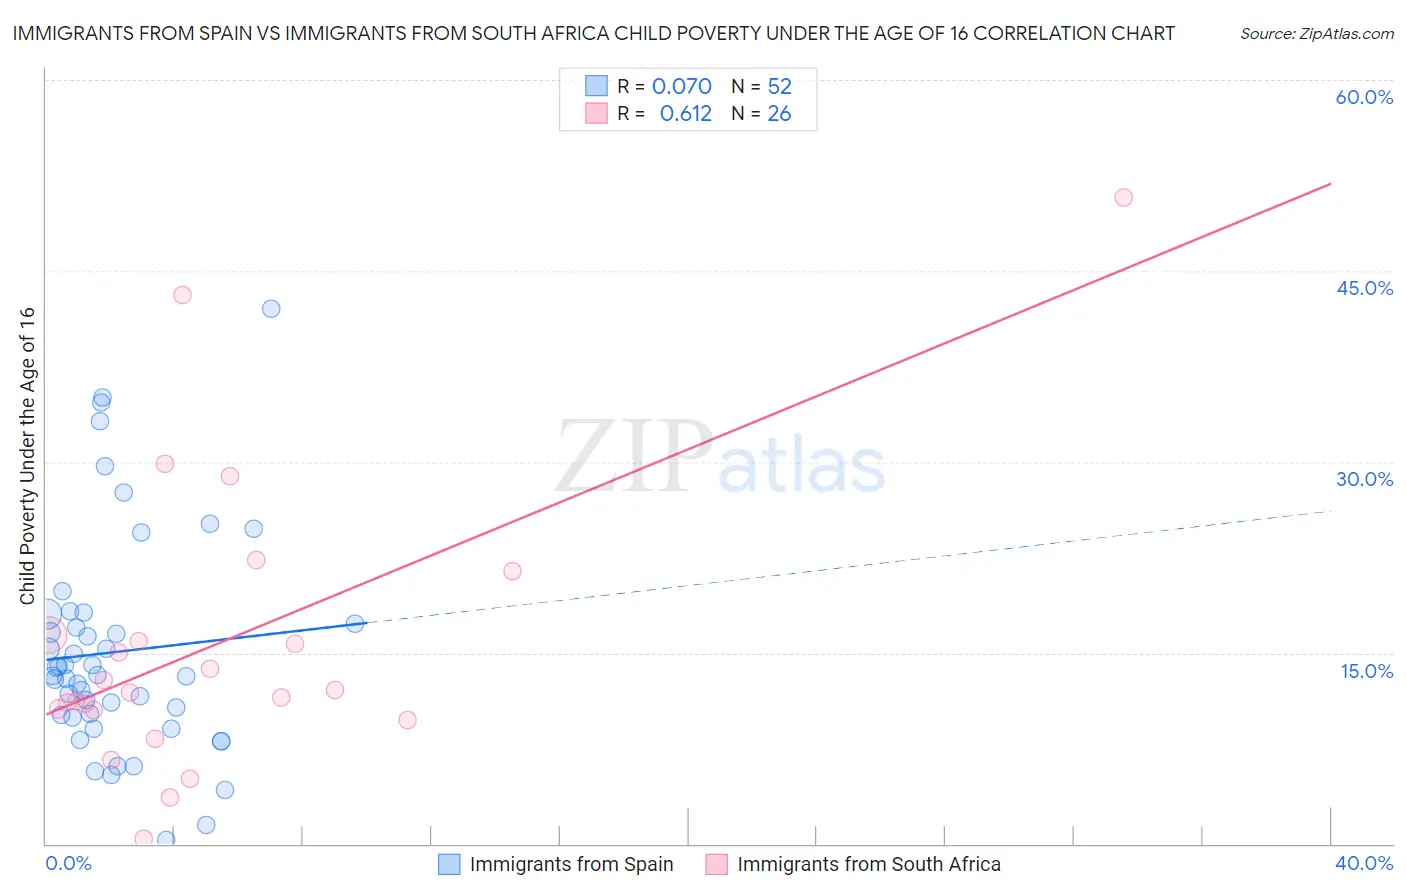 Immigrants from Spain vs Immigrants from South Africa Child Poverty Under the Age of 16